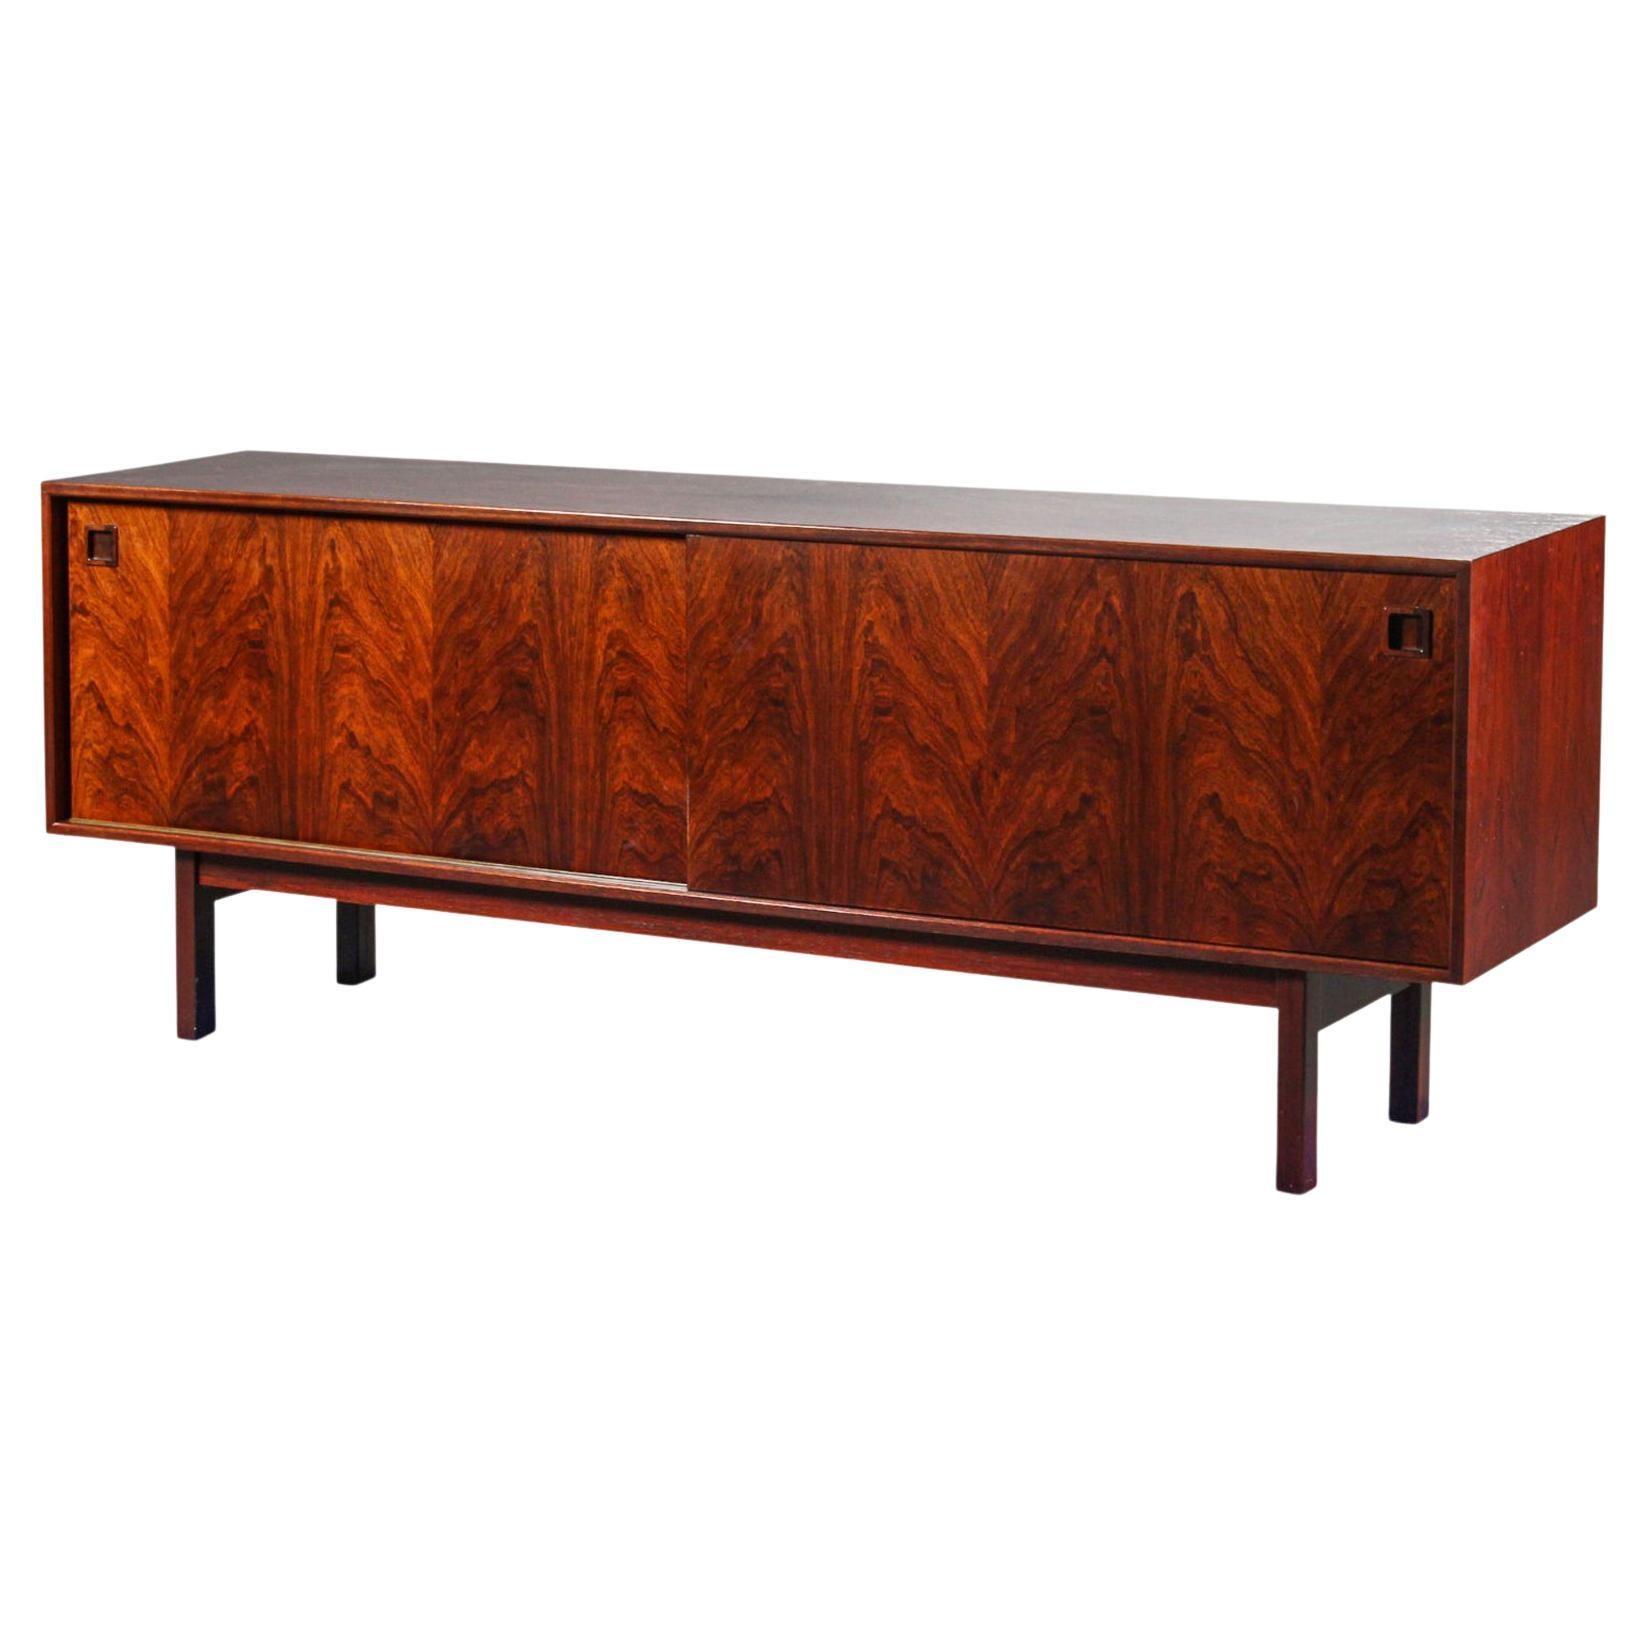 Model 21 Large Rosewood Credenza by Omann Jun